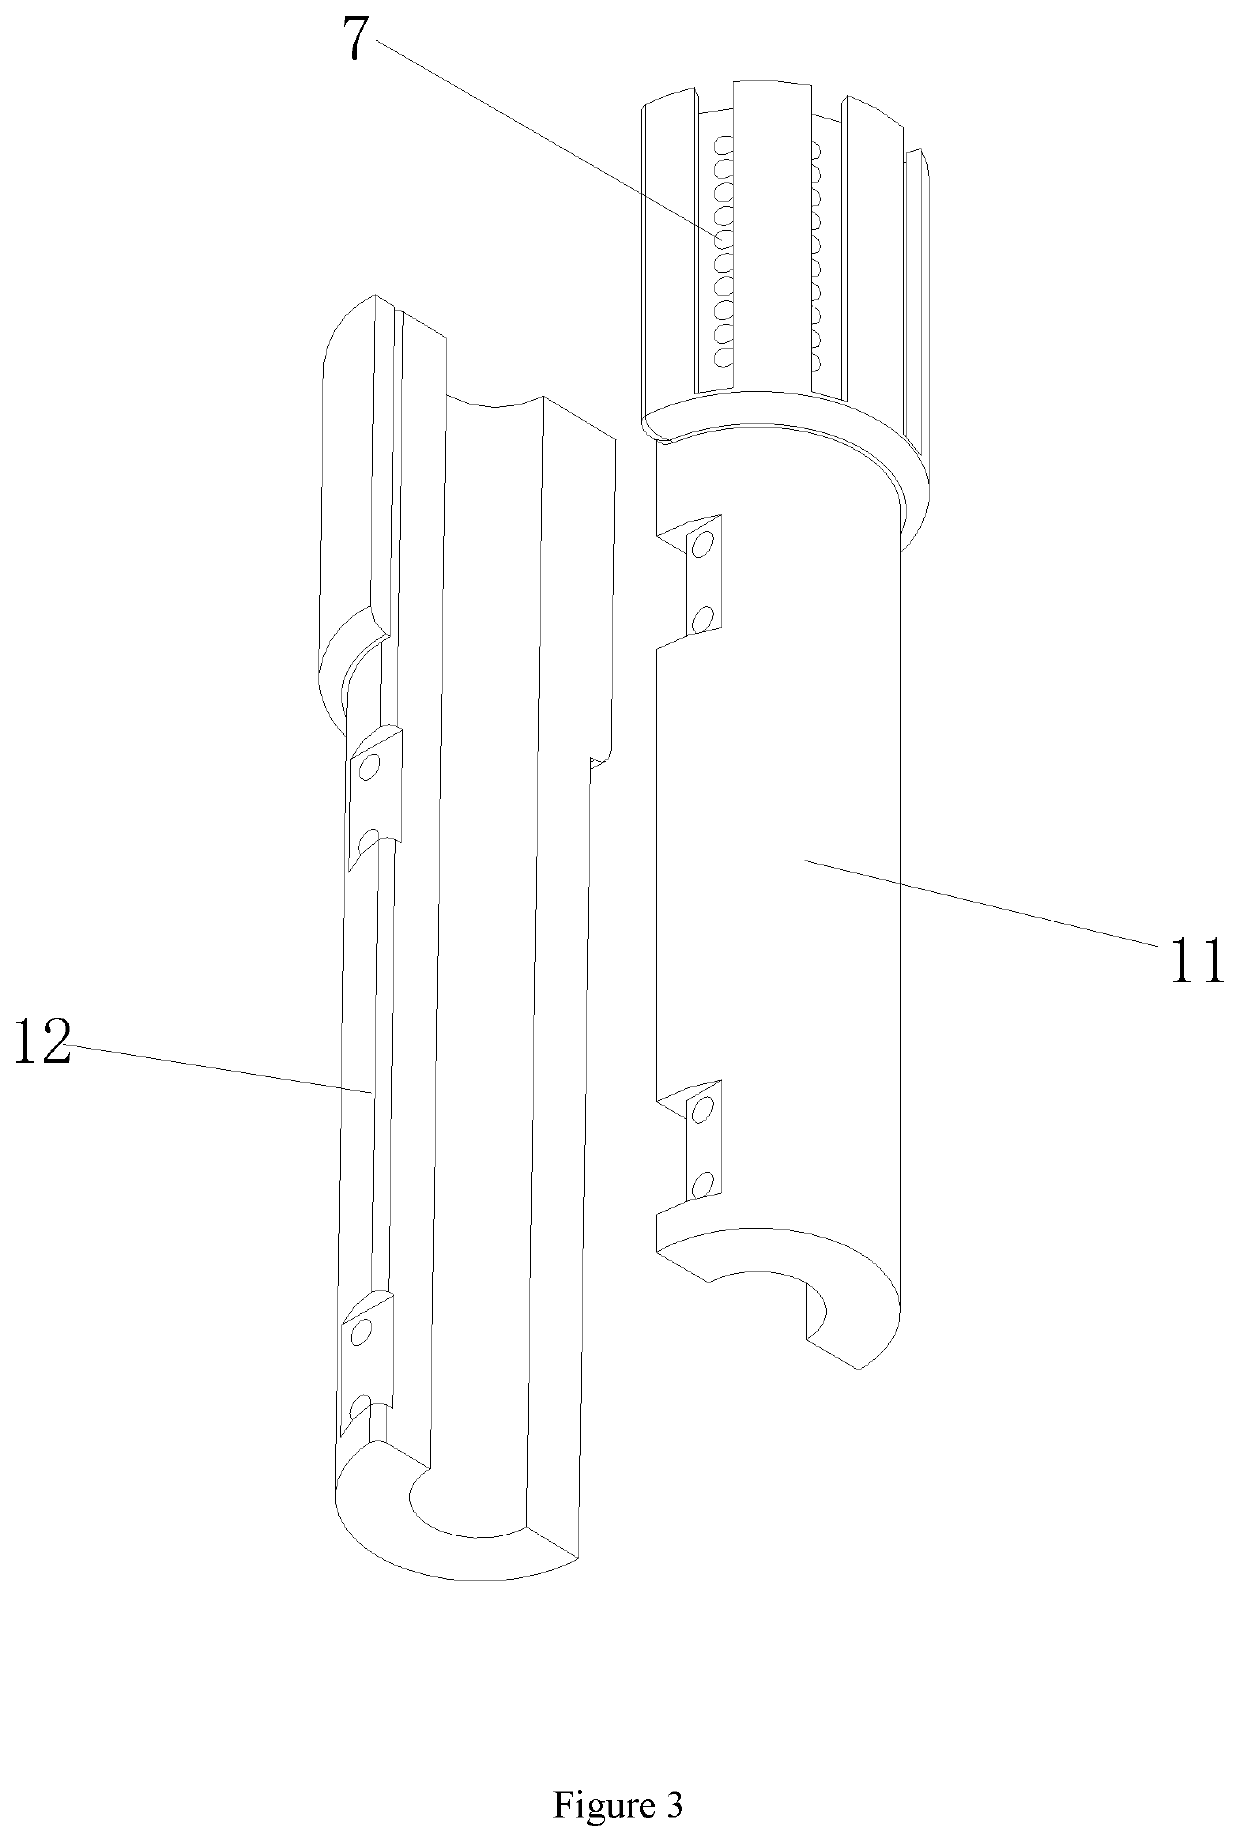 Positioning guiding device and positioning method thereof for acetabulum reaming and acetabular cup prosthesis implantation